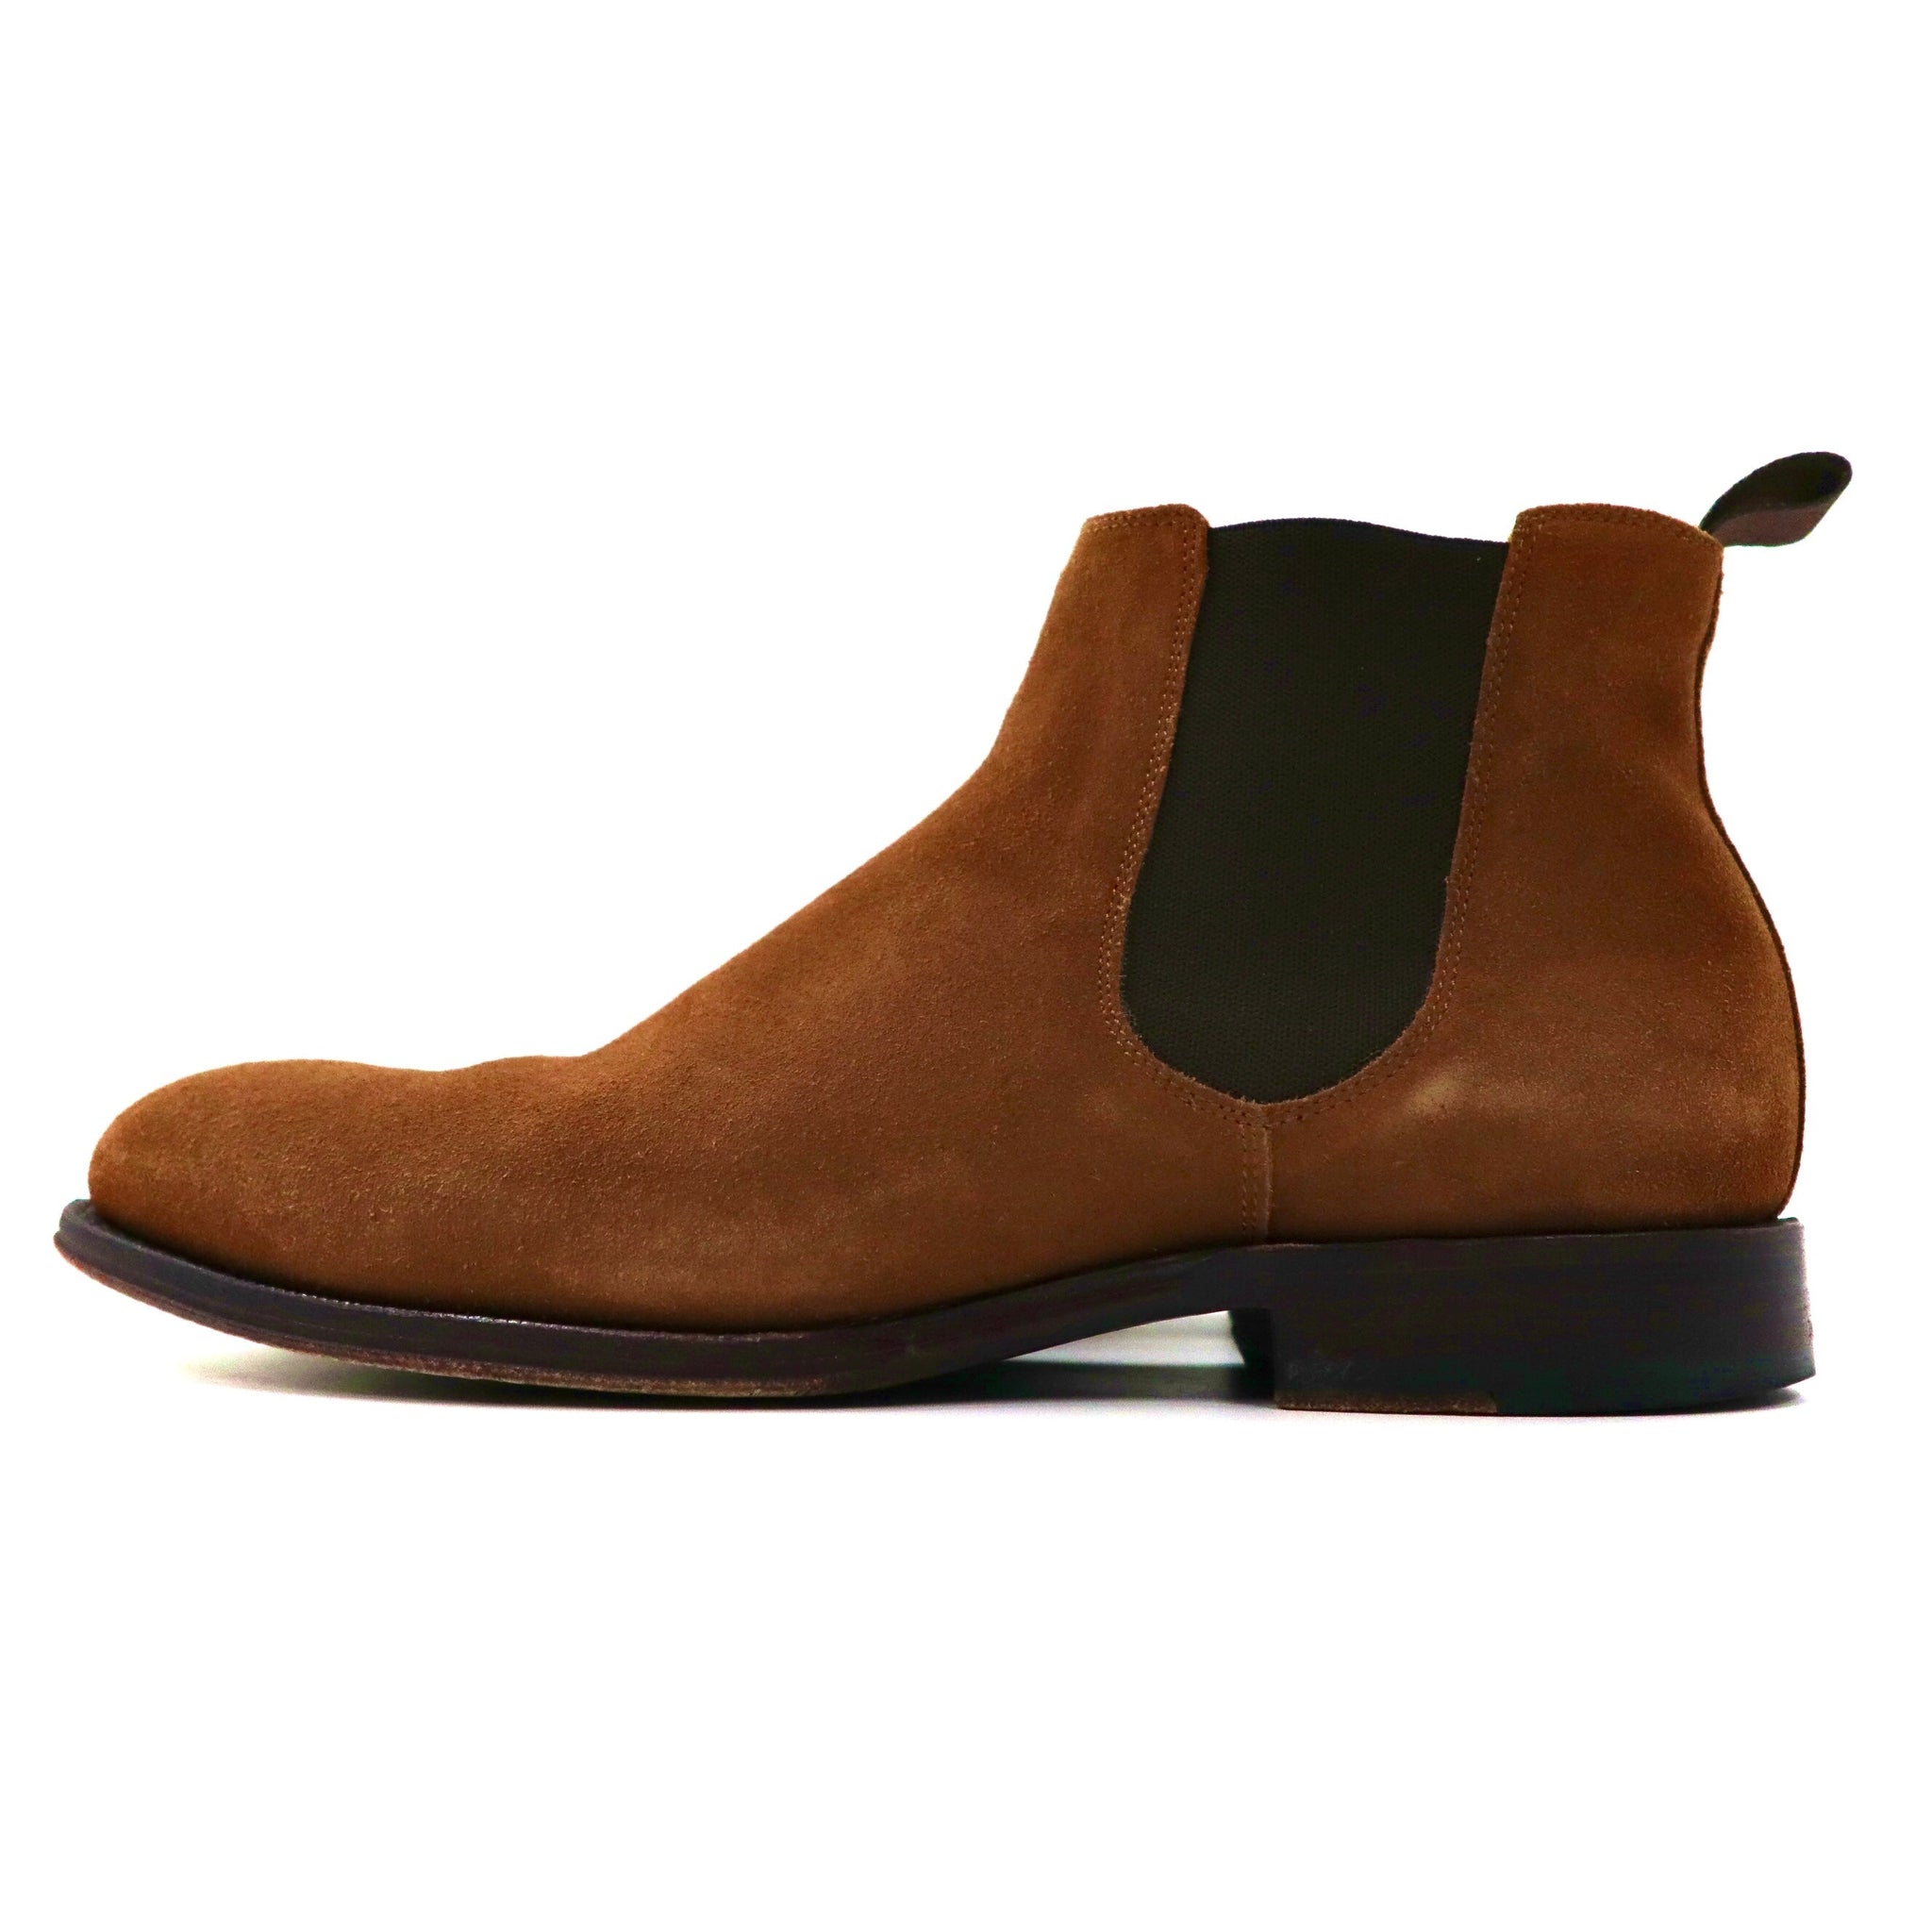 JALAN SRIWIJAYA Chelsea Boots US7 Brown SUEDE Leather Goodyear